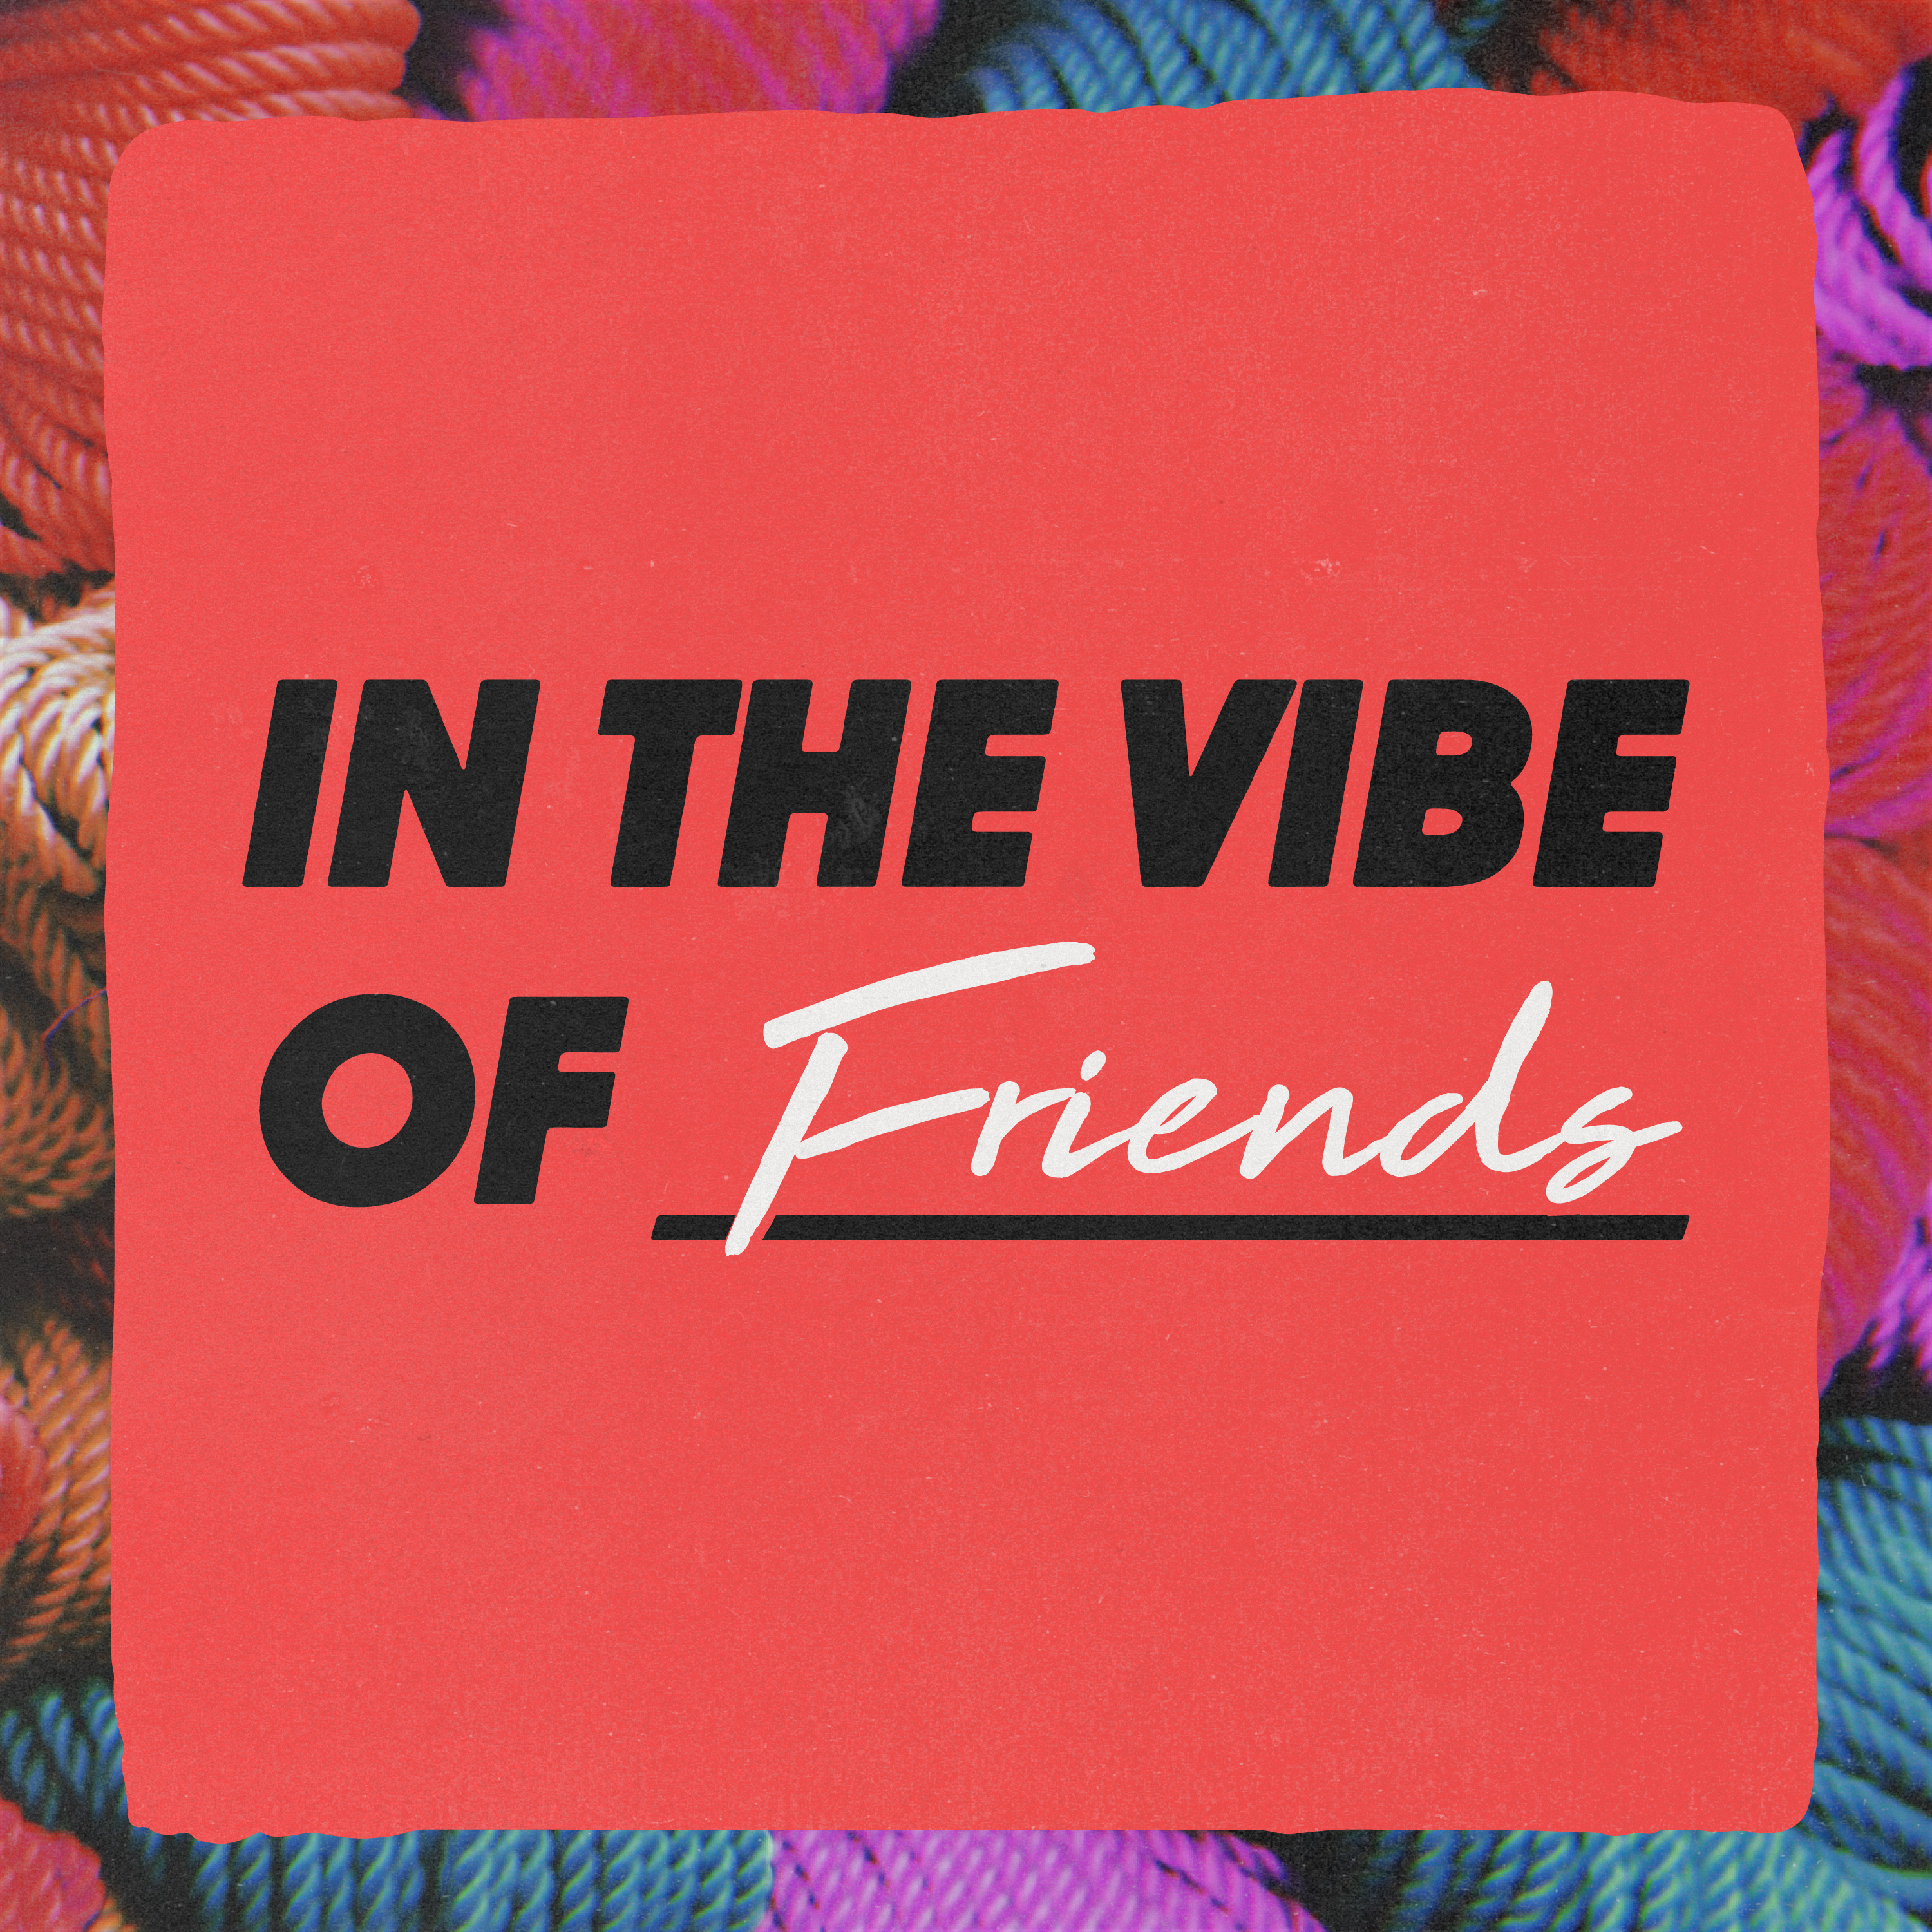 In The Vibe Of - Friends